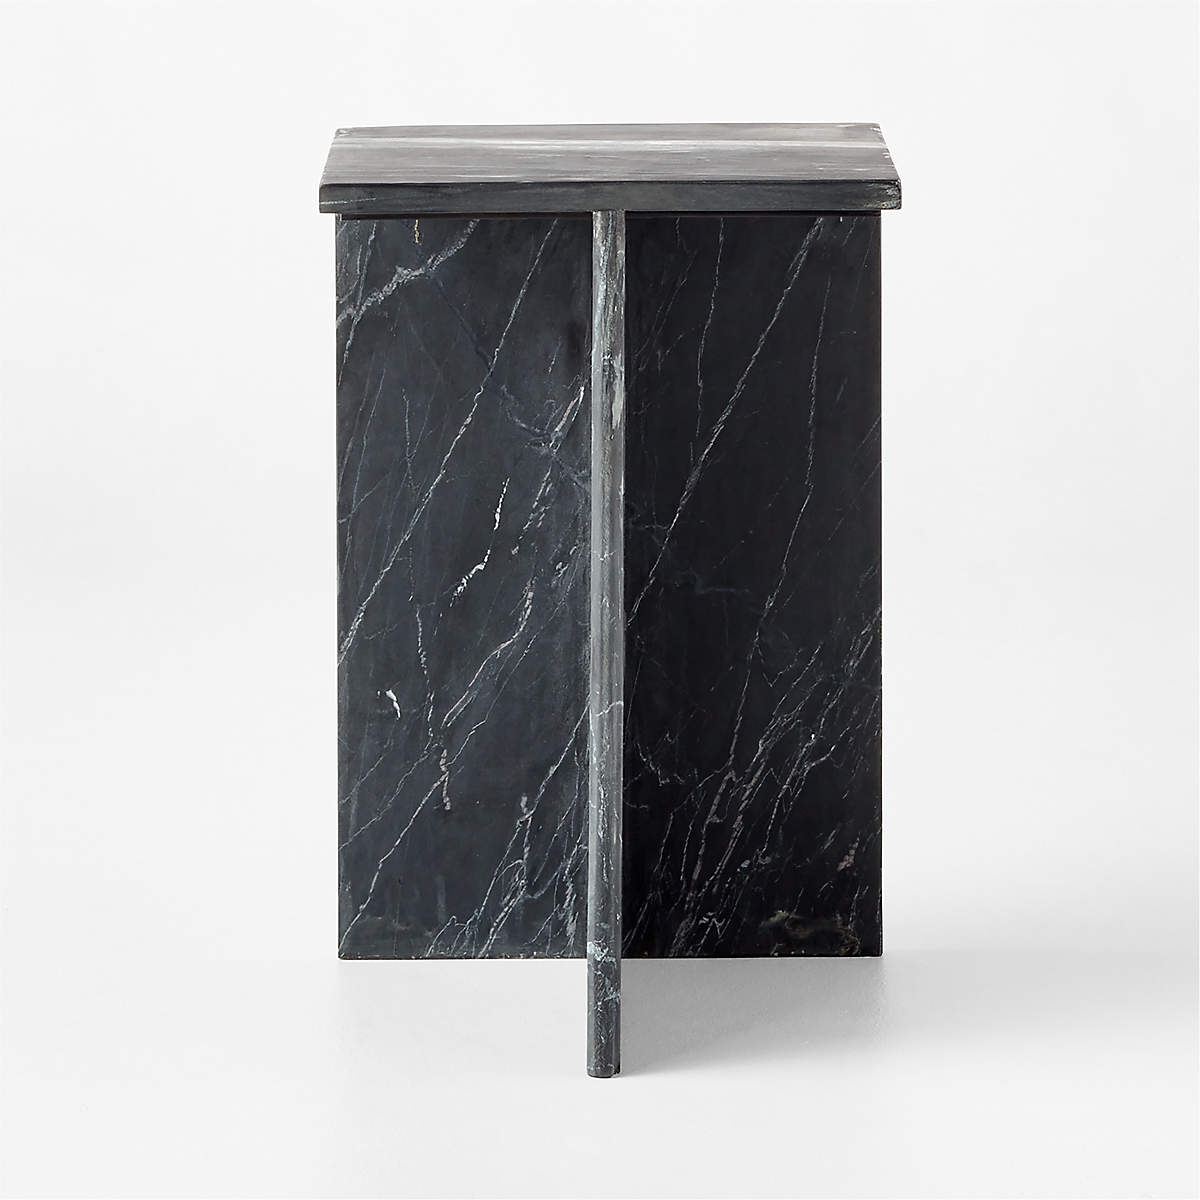 T Black Marble Tall Table - Image 1